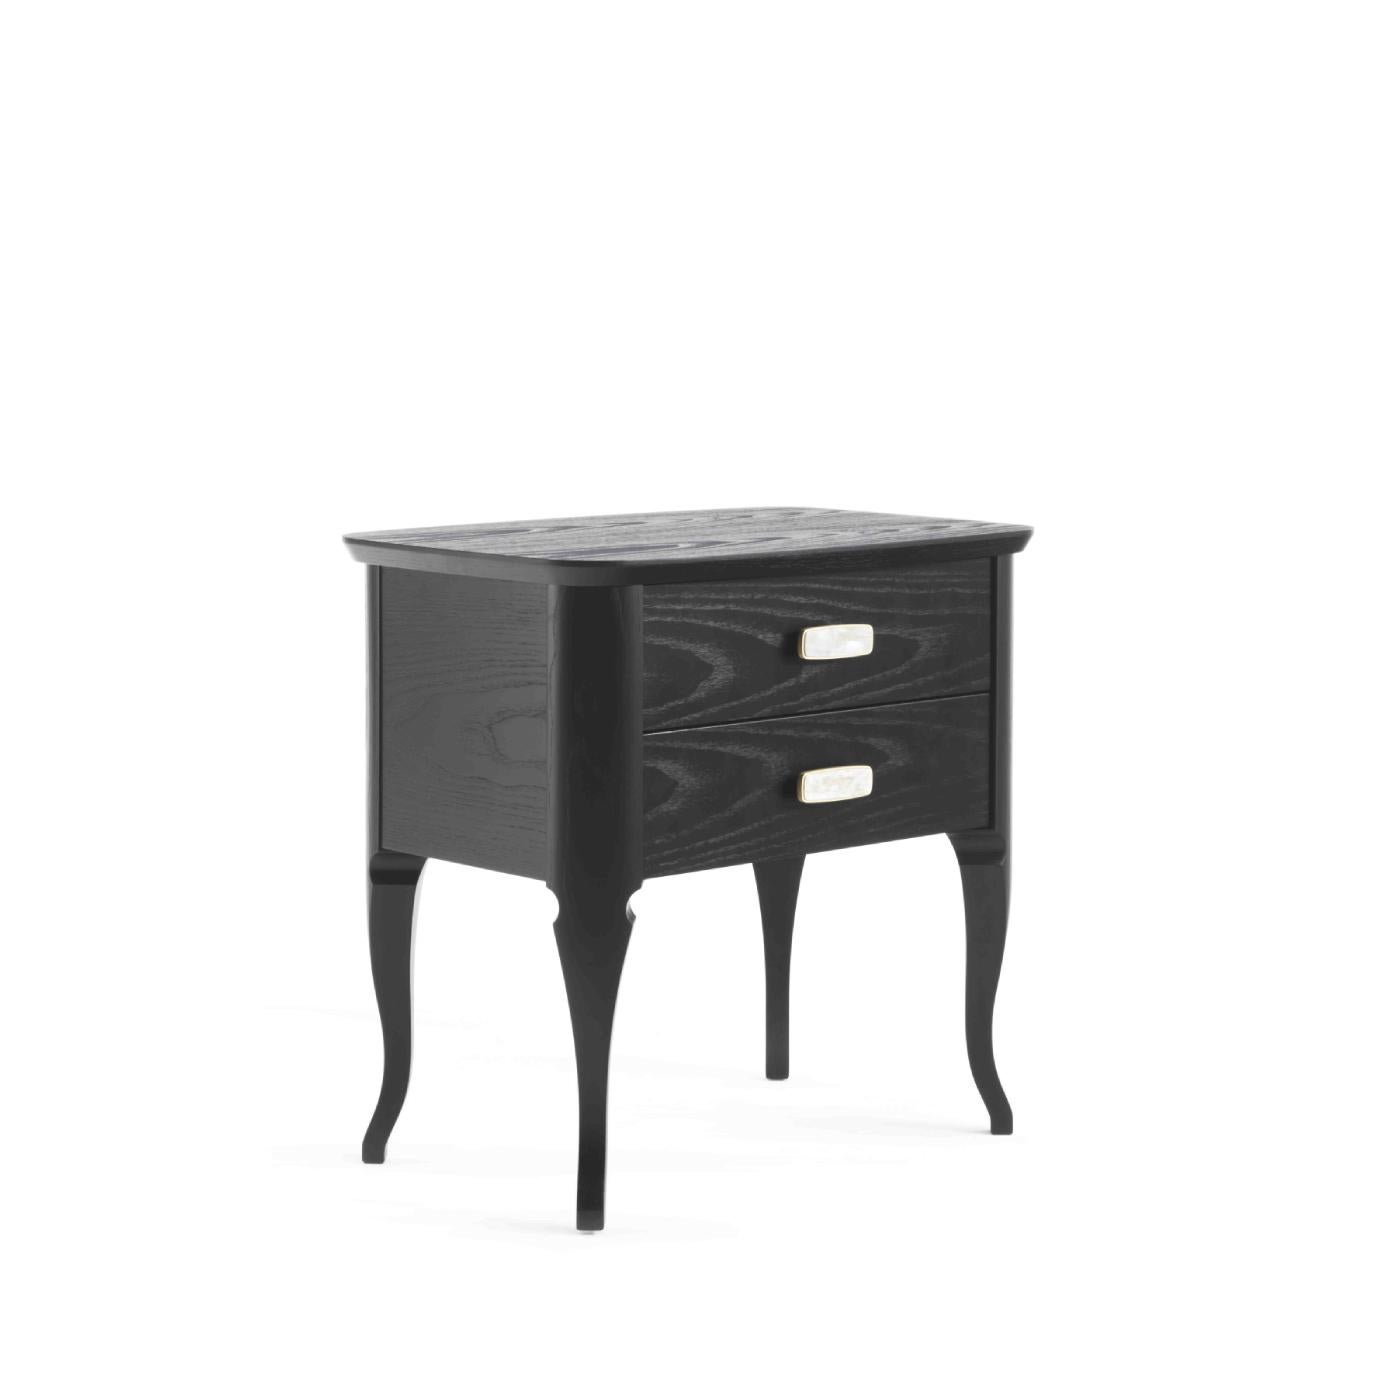 Combining the essential lines of mid-century design with exquisite craftsmanship, this nightstand is the perfect addition to a modern bedroom decor. The rectangular construction in ash-veneered wood stands on four cabriole legs features two drawers